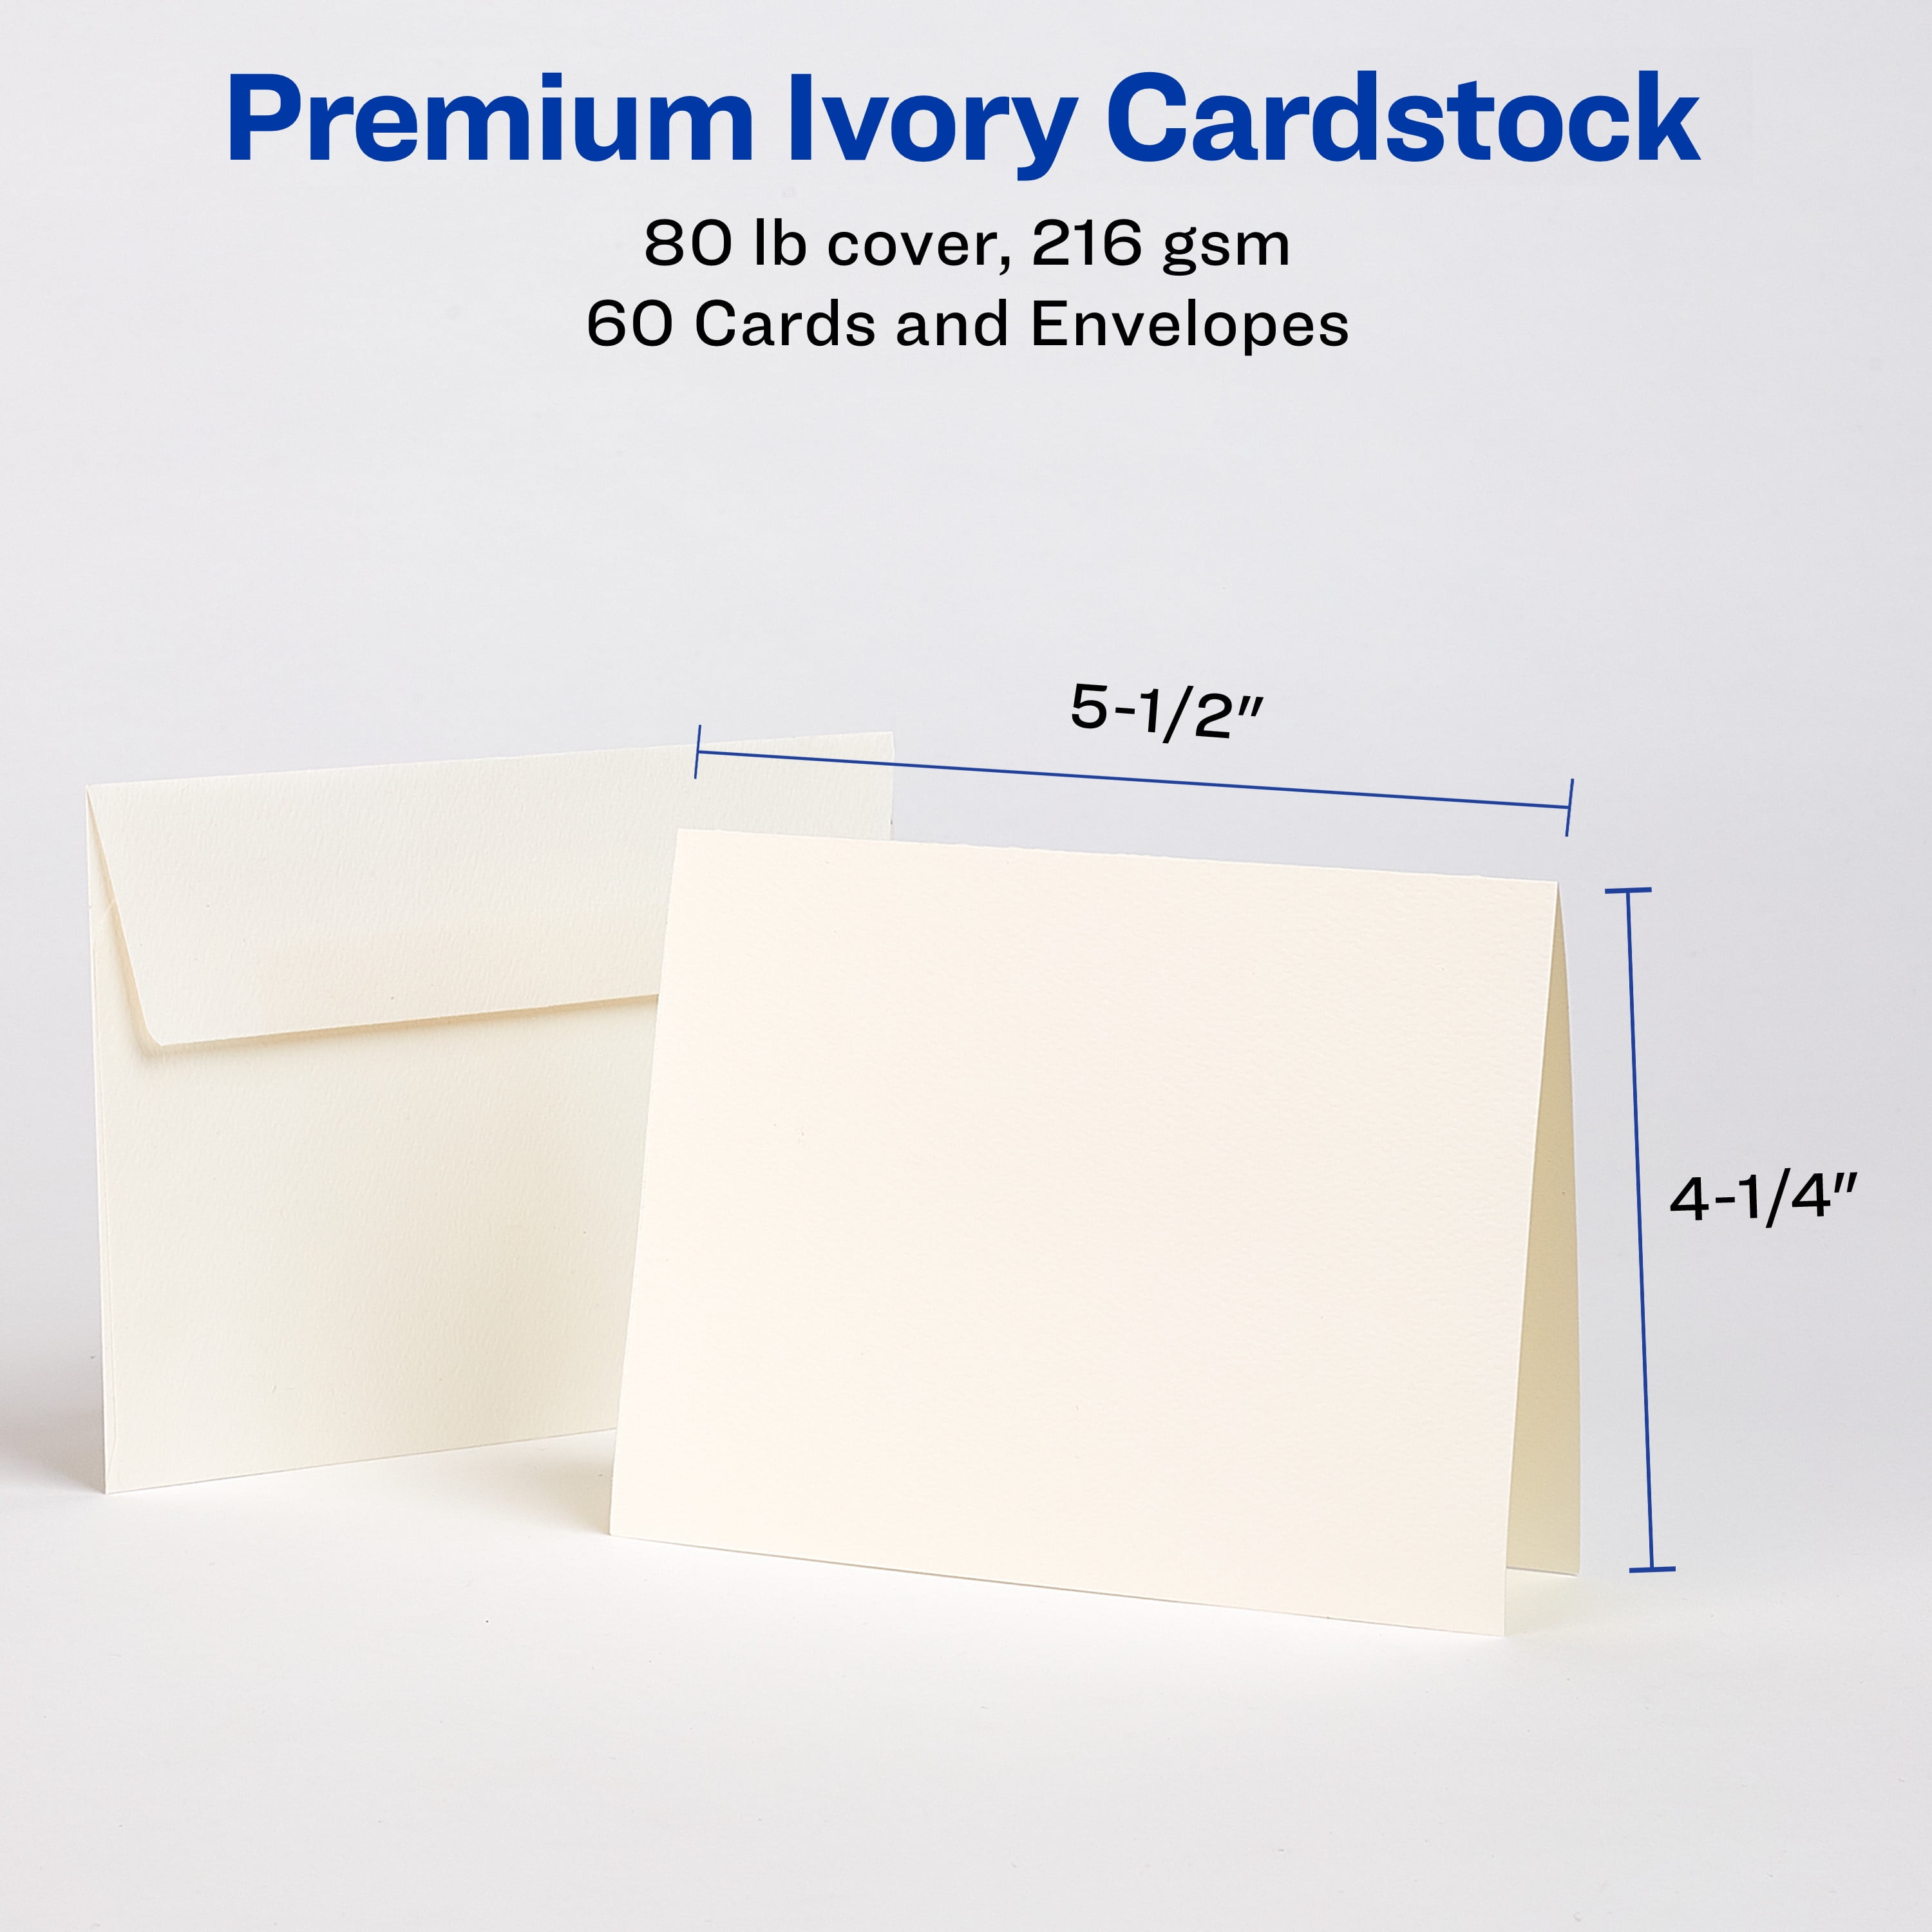 Blank Note Cards with Envelopes (50ct) - Ivory